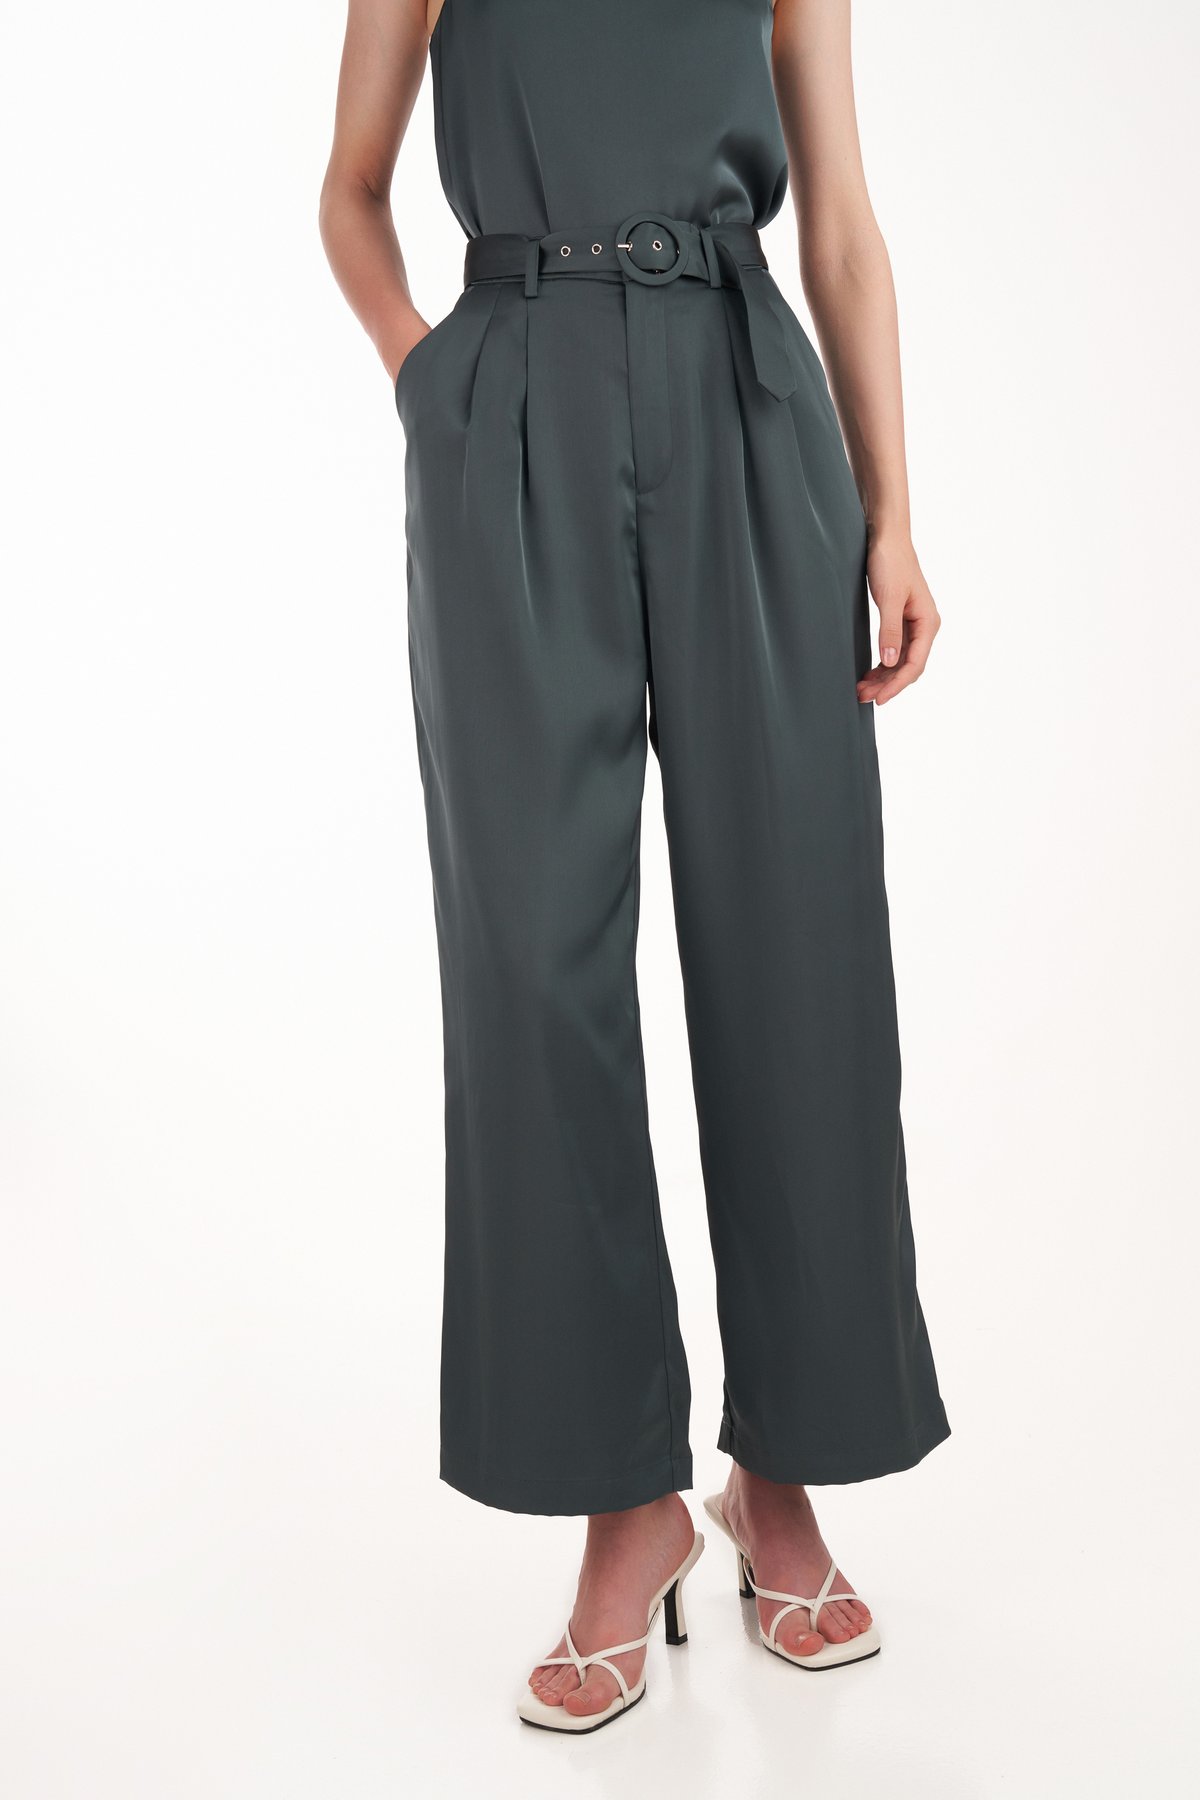 Lenne Satin Belted Pants in Forest